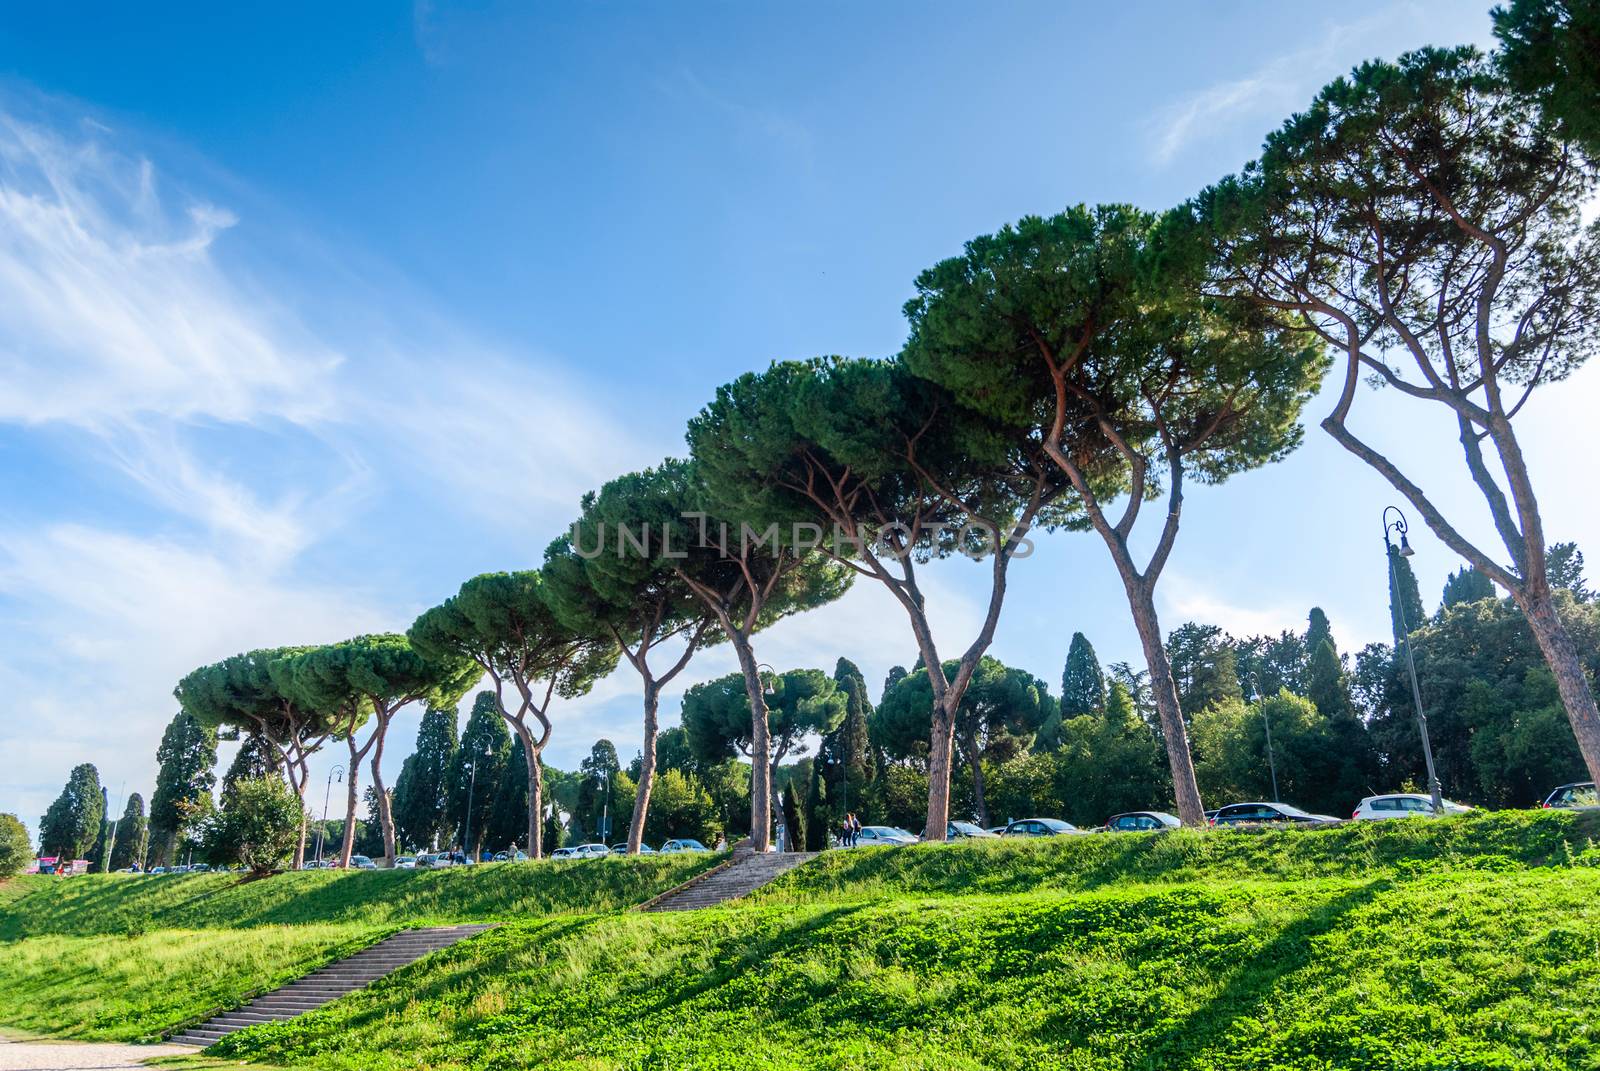 Italian Stone Pines Pinus Pinea also known as Umbrella Pines and Parasol Pines, tall trees near Aventine Hill, Rome. Italy.